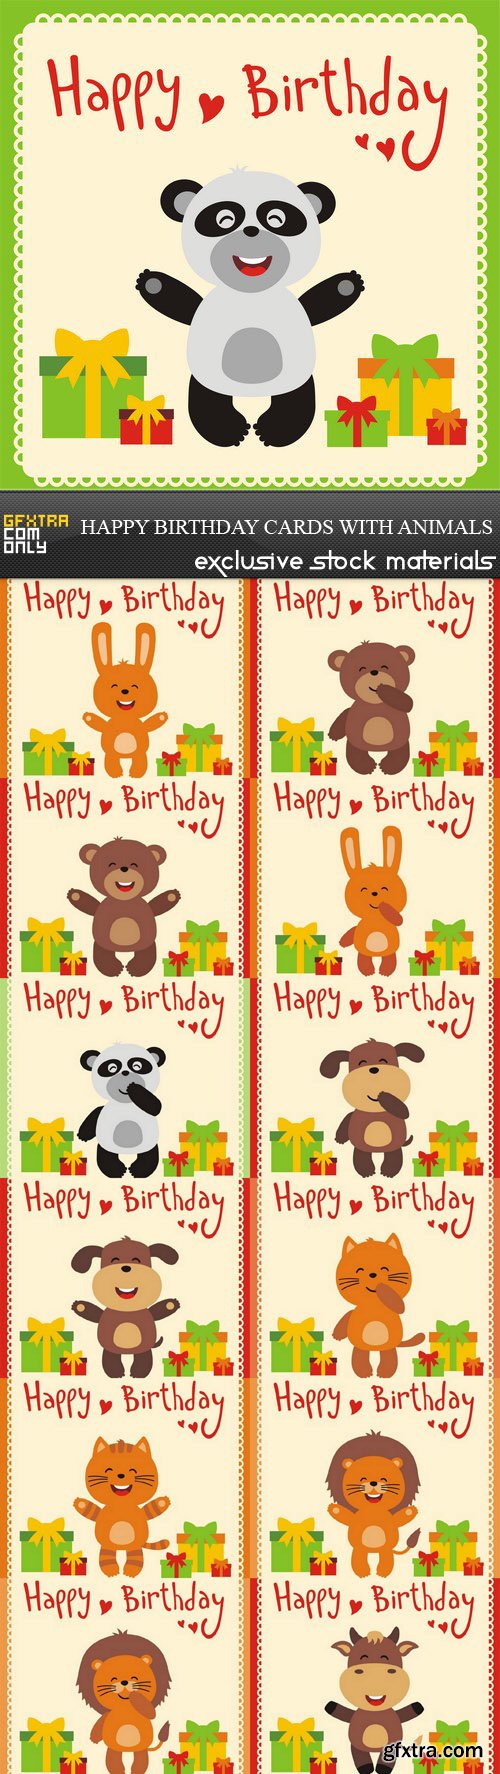 Happy Birthday Cards with Animals - 13xEPS